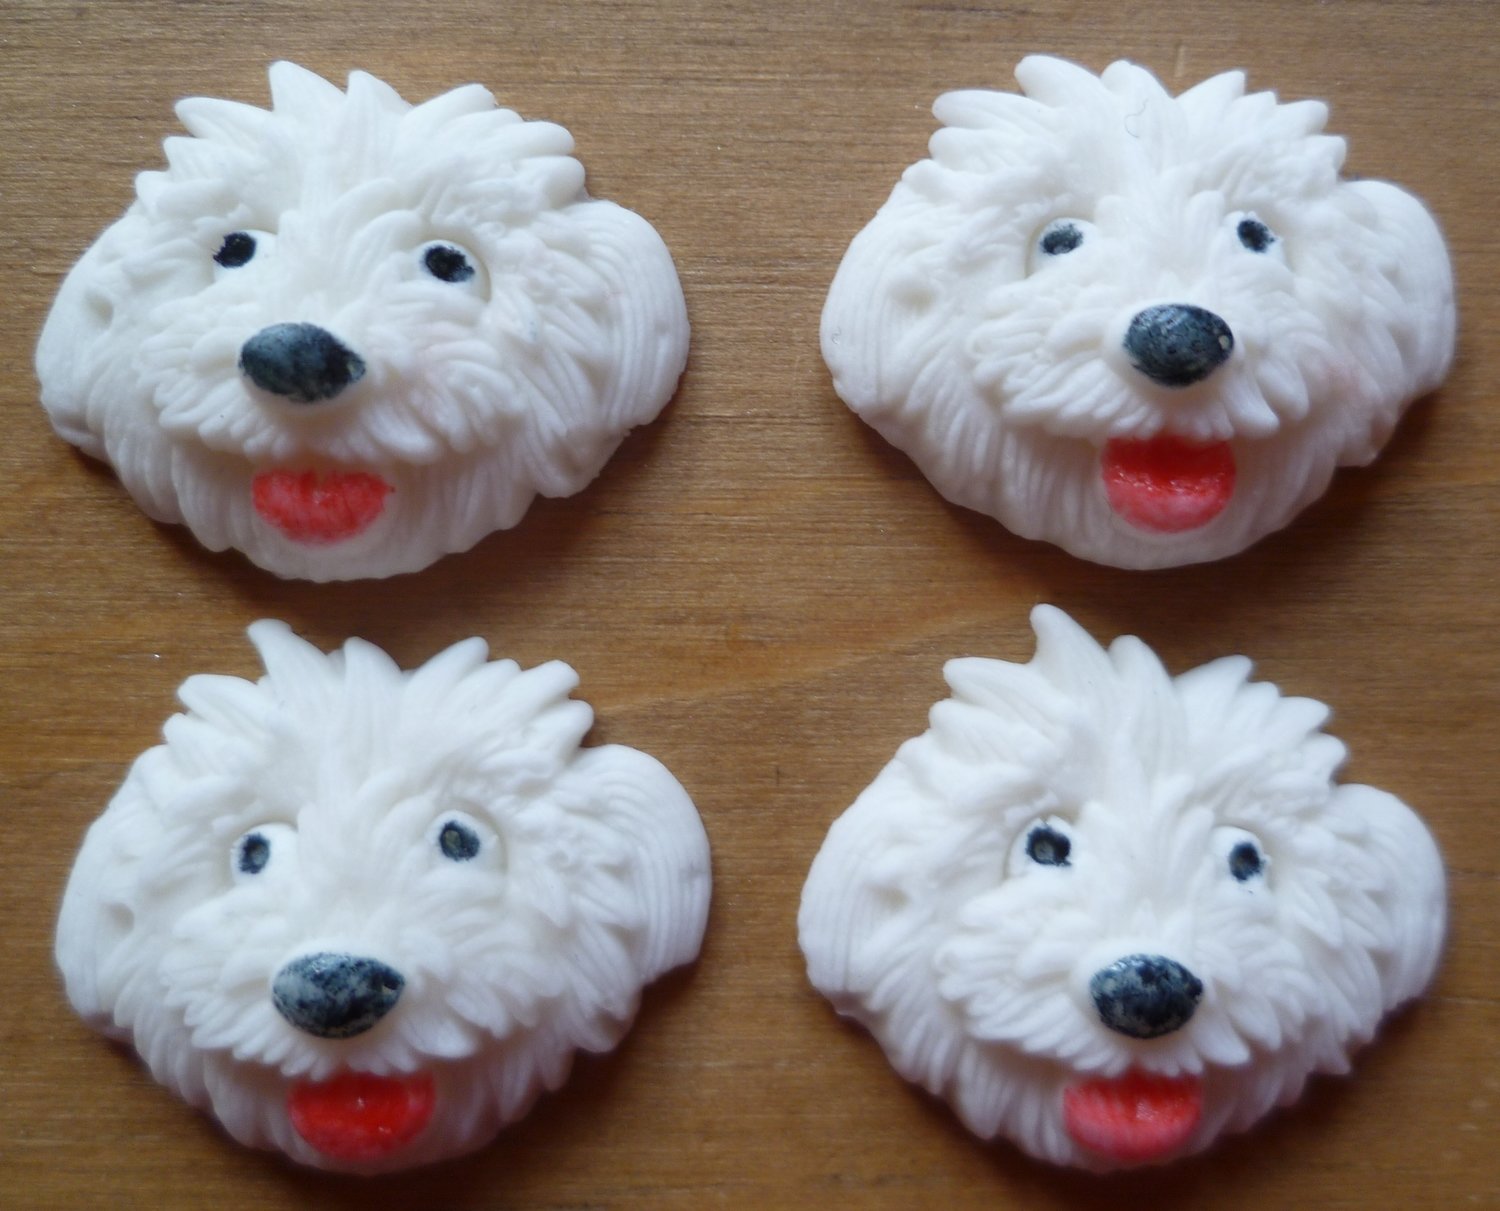 12 WESTIE EDIBLE CAKE TOPPERS